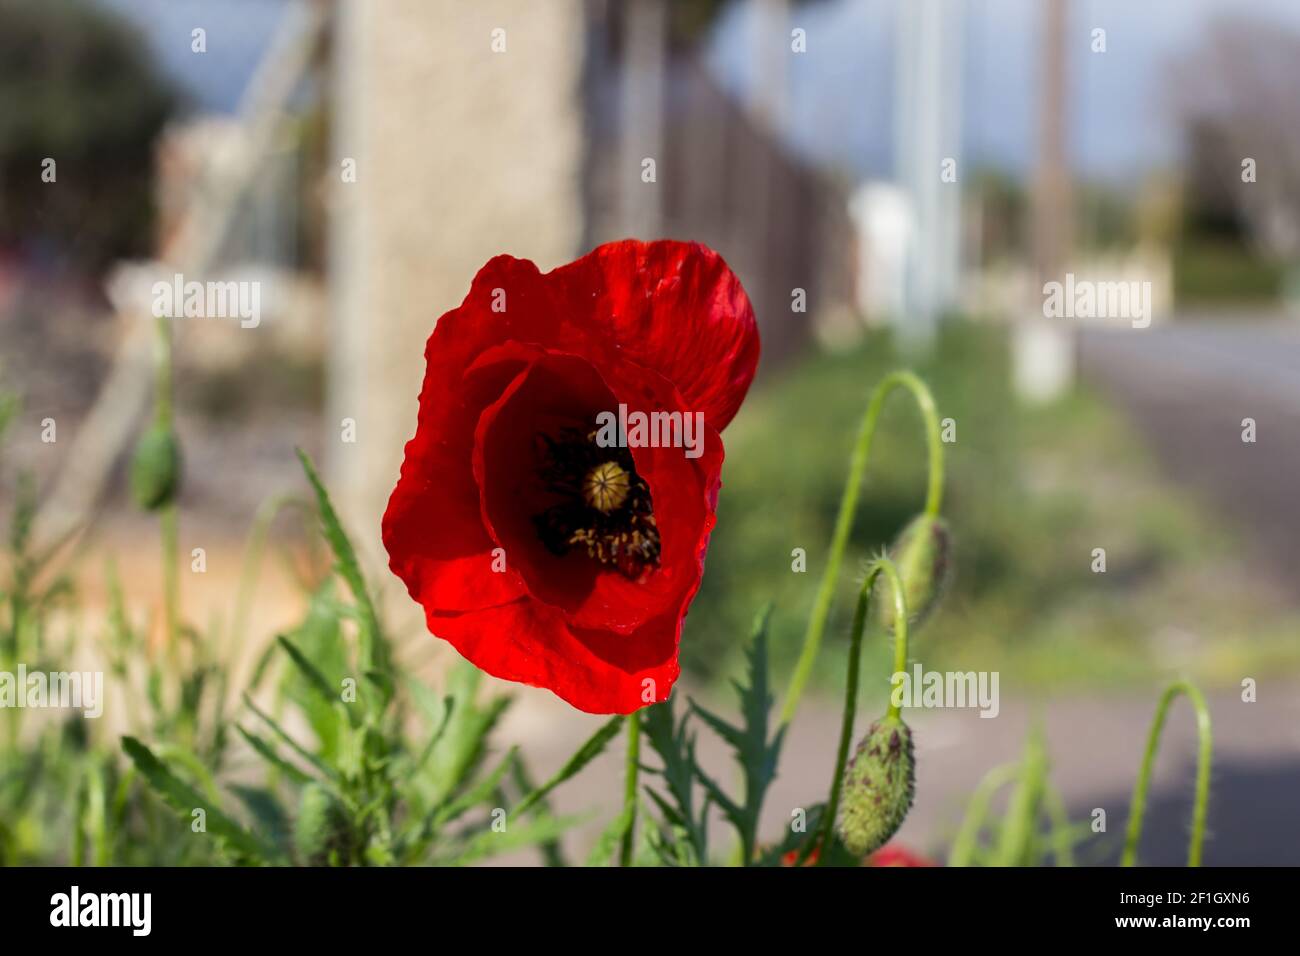 A beautiful view of a red and black poppy flower growing in the street on a blurry background Stock Photo